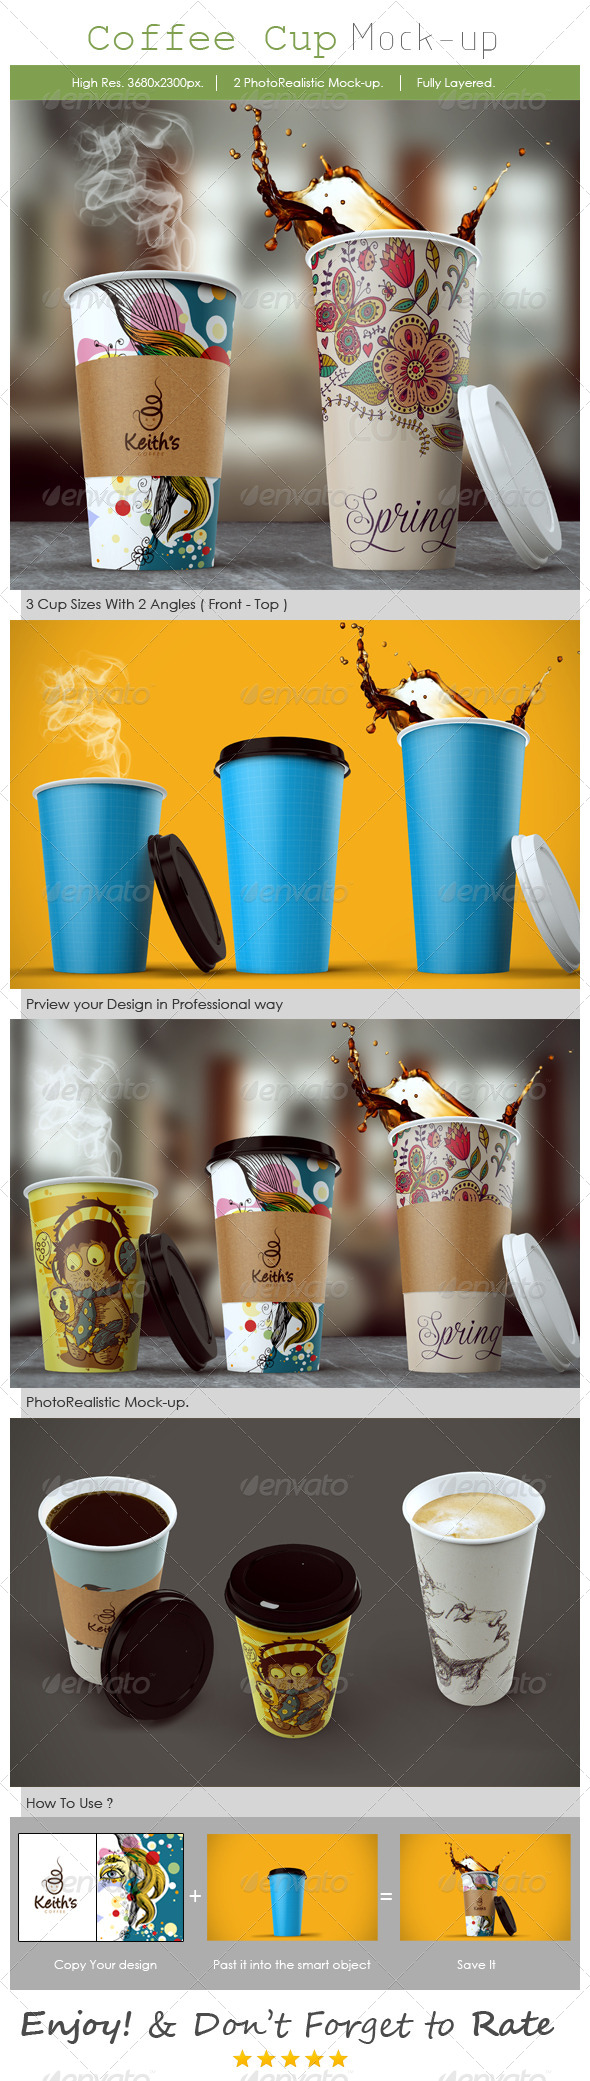 Download Coffee Cup Mockup by MahmoudRafik | GraphicRiver